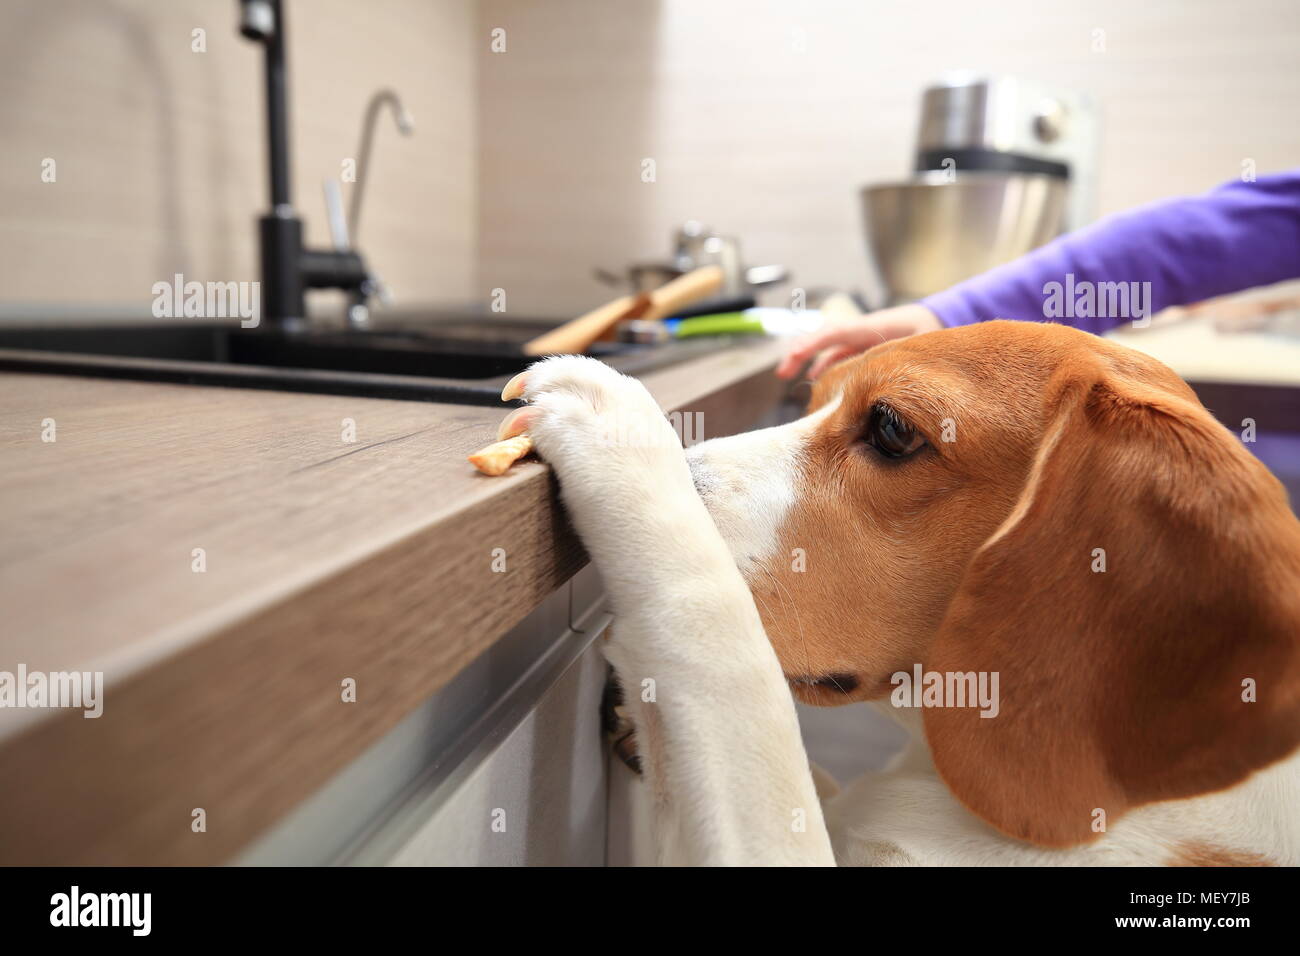 Beagle dog steals yummy from table. Smart funny animals concept Stock Photo  - Alamy